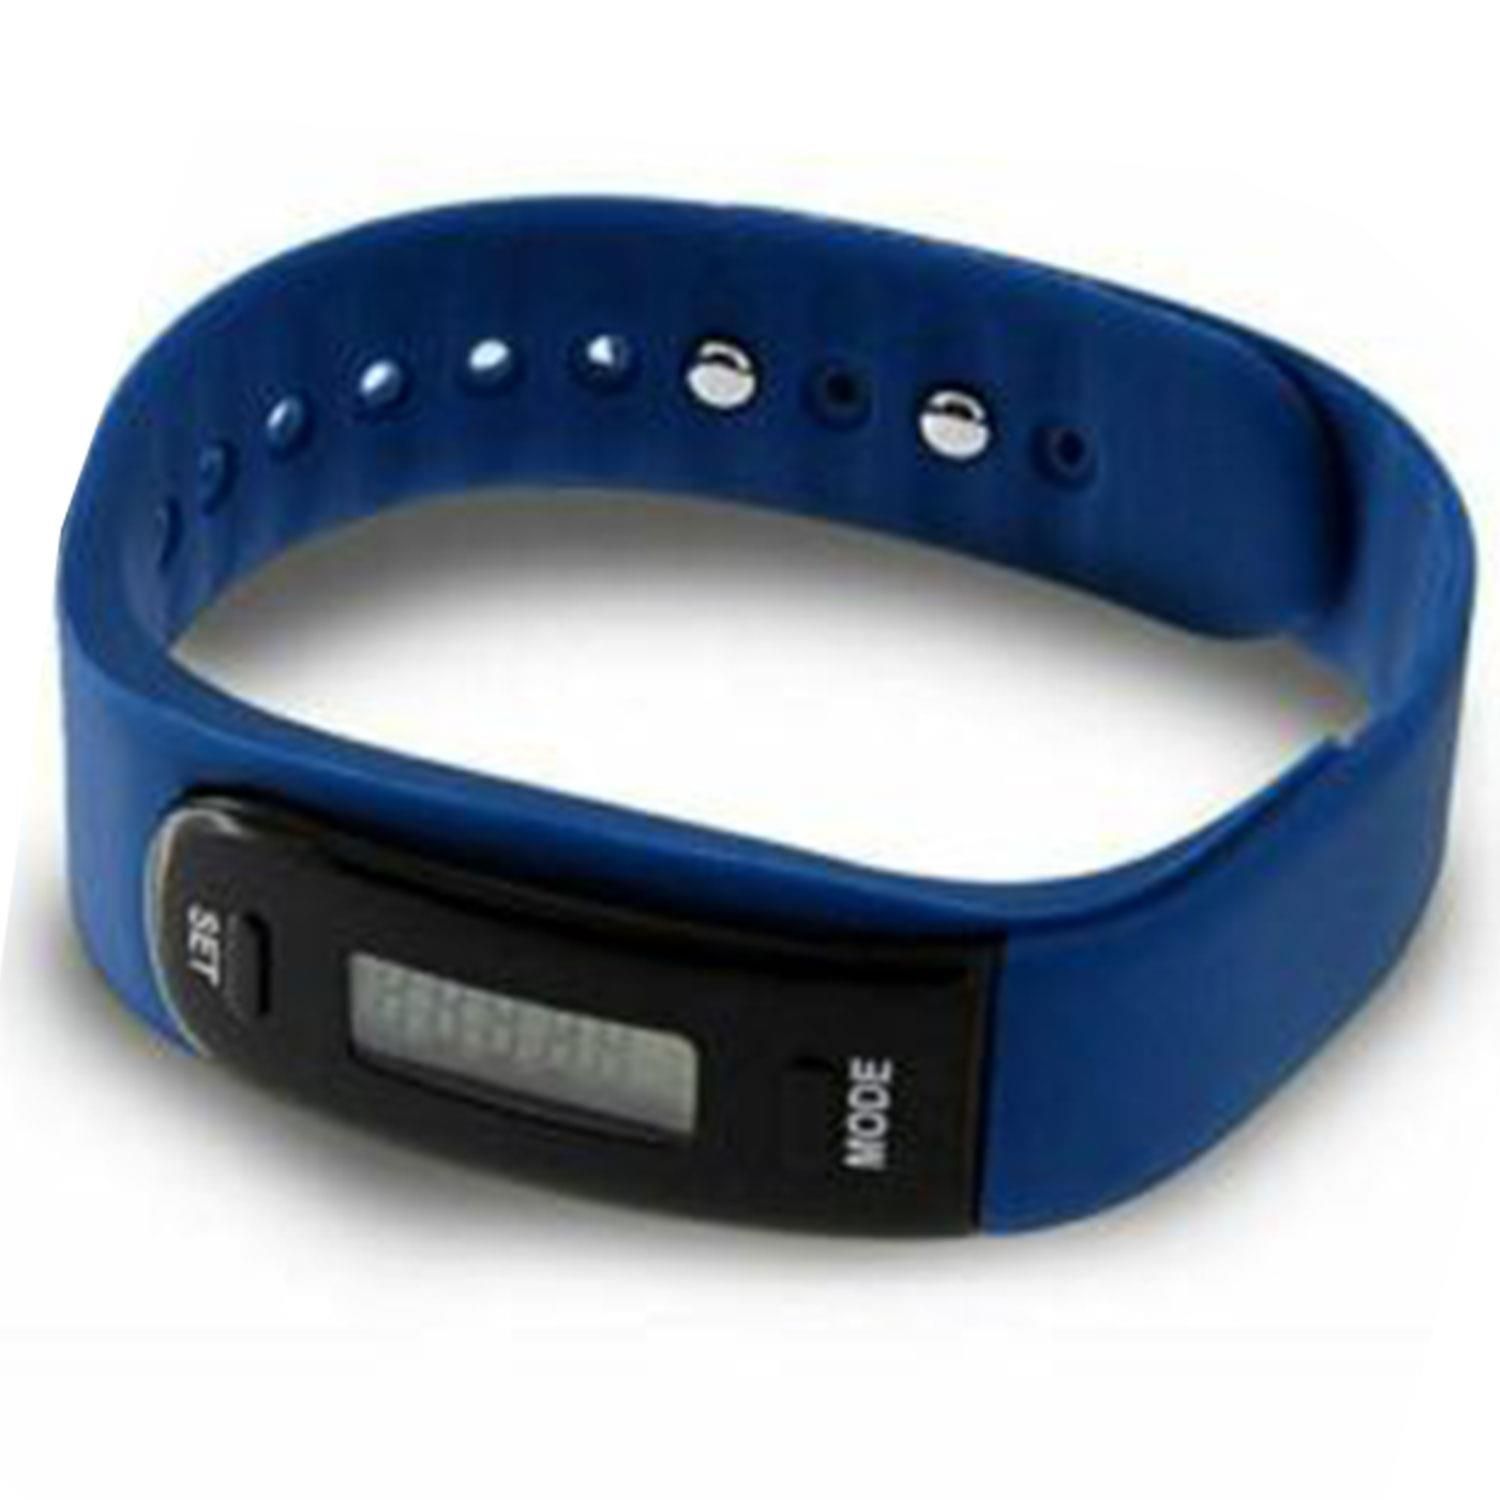 Aquarius 111 Teen Fitness Activity Pedometer Smart Wristband Tracker - Blue

Aquarius 111 is the next best thing in smartwatches for kids! With 6 colours available and a range of features like digital time display to sleep tracking, cronometer, distance and calorie display, your child will love to learn how to tell the time while keeping in track of his daily activities.


Key Features : 
Pedometer, Distance, Calories, Sports Time, Sports Speed, Setting (Year, Month, Date, Time and Personal information).
The pedometer is a non-Bluetooth, non APP and no smartphone needed design, a simple but powerful pedometer. 
It is very easy to use, the perfect gift for your kids, parents, family, friends.
High-performance button battery last between 1-2 years, So it means that it can't be charged.
Technical Specifications :
Working Voltage: 1.5V
Working Current: 11-3uA
Display Screen: LCD 0.69’’ E-link Display
Battery: Button cell battery AG3/LR41
Waterproof Grade: IP56
Product Specifications:
Brand: Aquarius 
Materials: Rubber
Model: AQ111
Weight: 42g
Display: LED Display
Product Dimensions: 8x9x3cm
Package Includes: 1x Aquarius AQ 111 Teen Fitness Activity Tracker